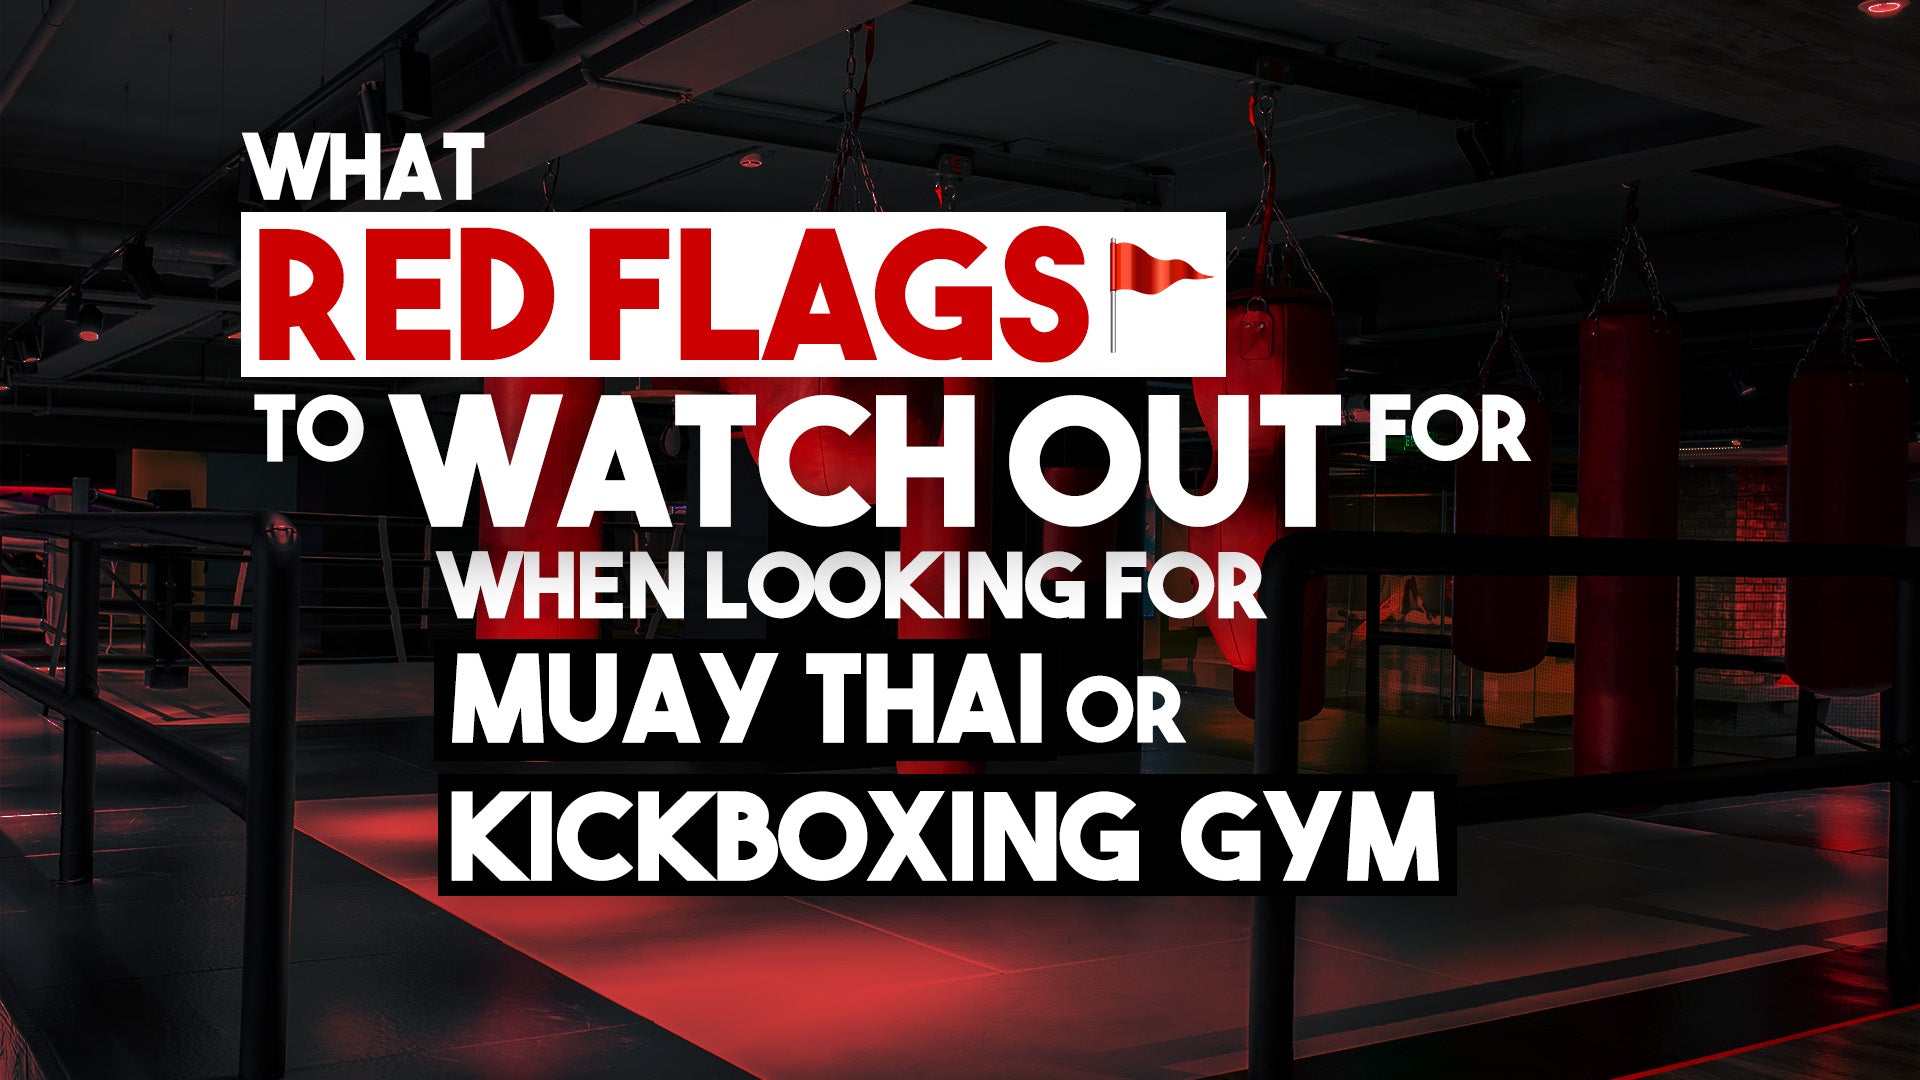 What Red Flags to Watch Out for When Looking for Muay Thai or Kickboxing Gym